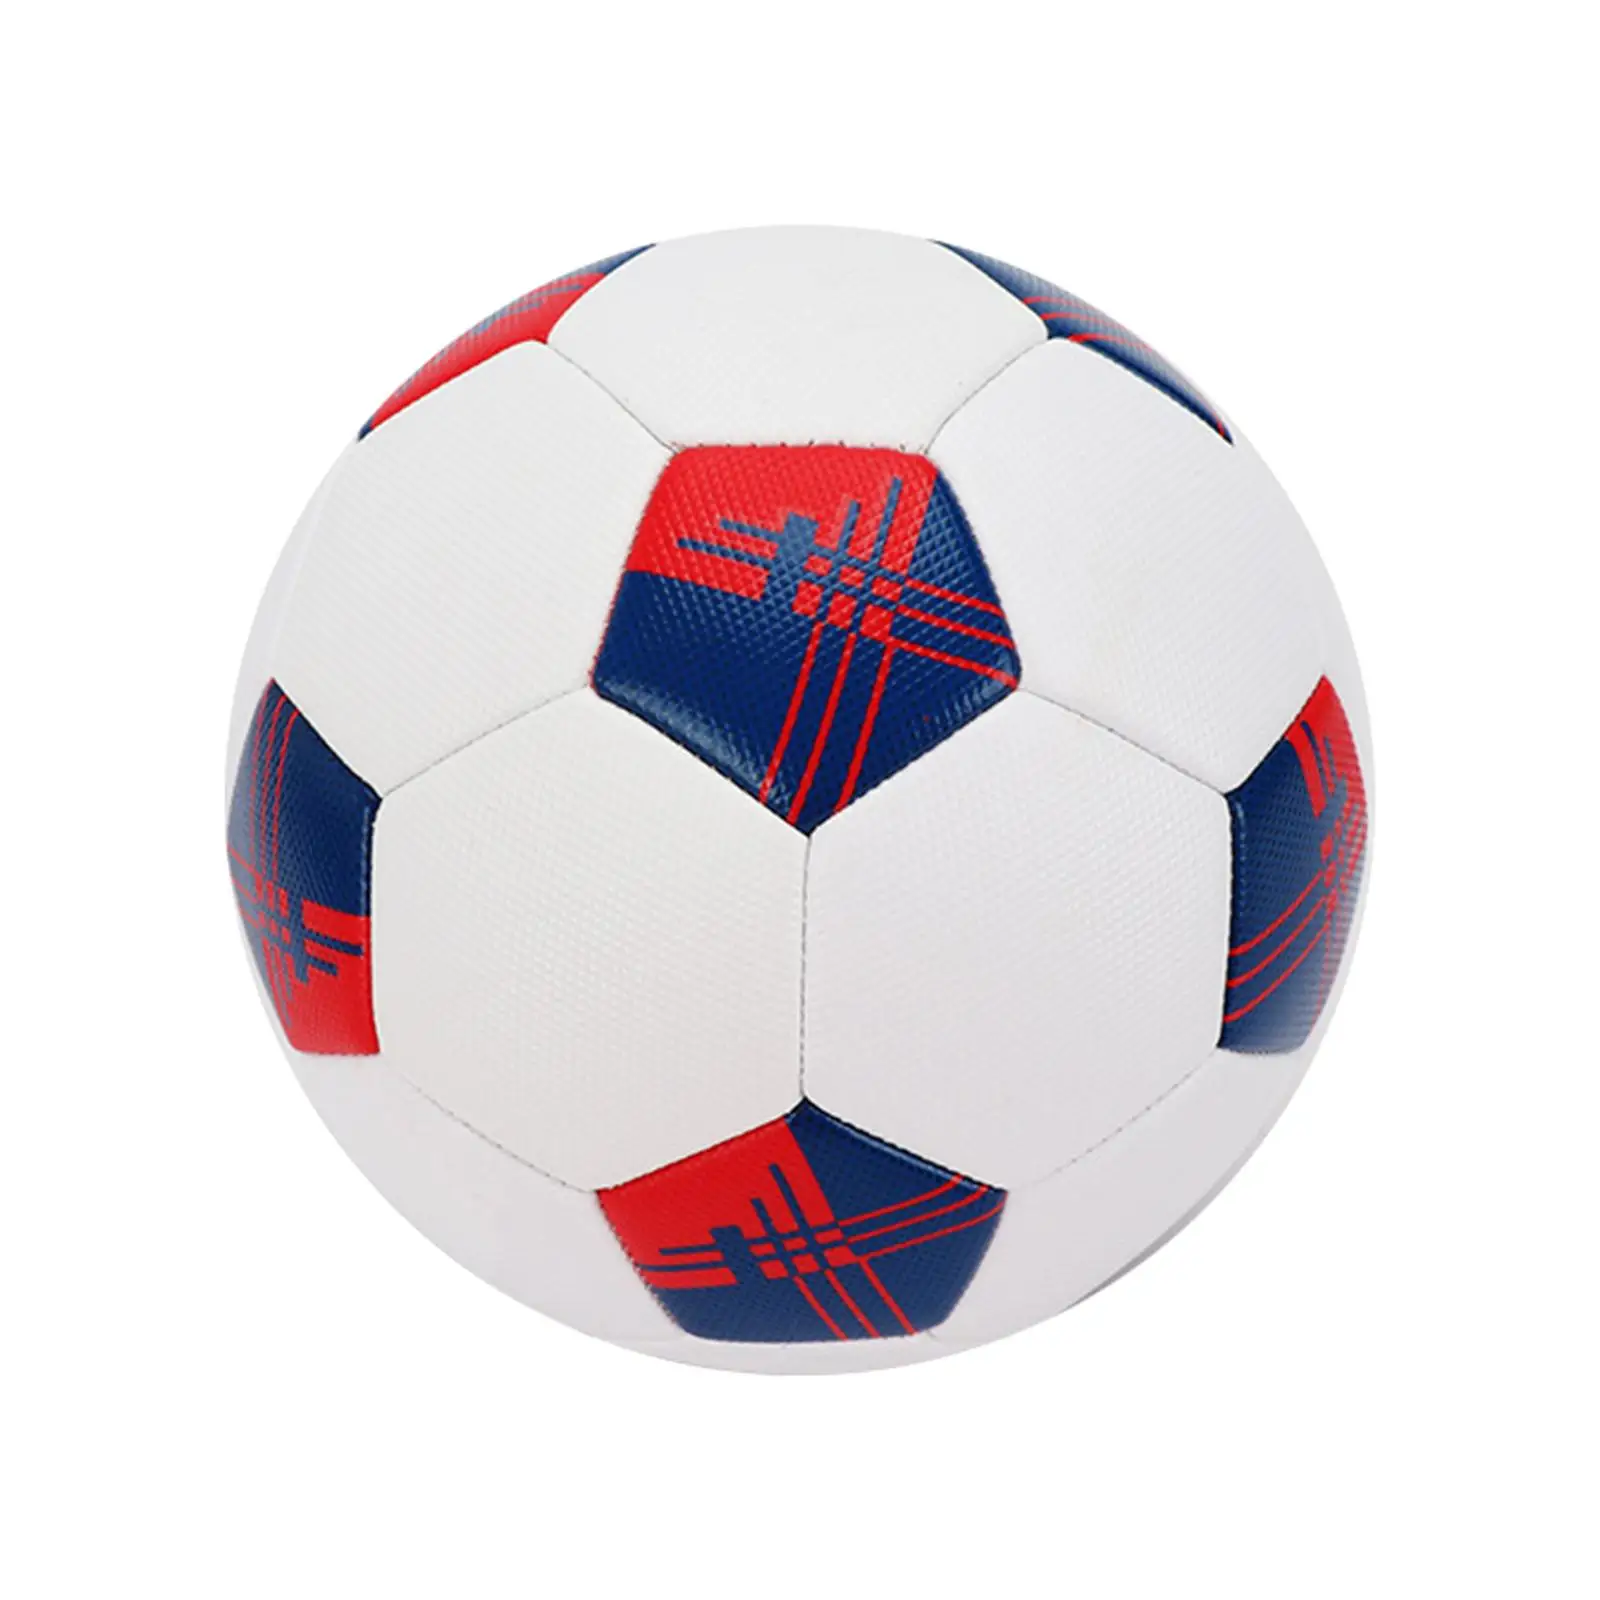 Soccer Ball Size 5 Kids Adult Team Sports Training Game Stitched Match Ball